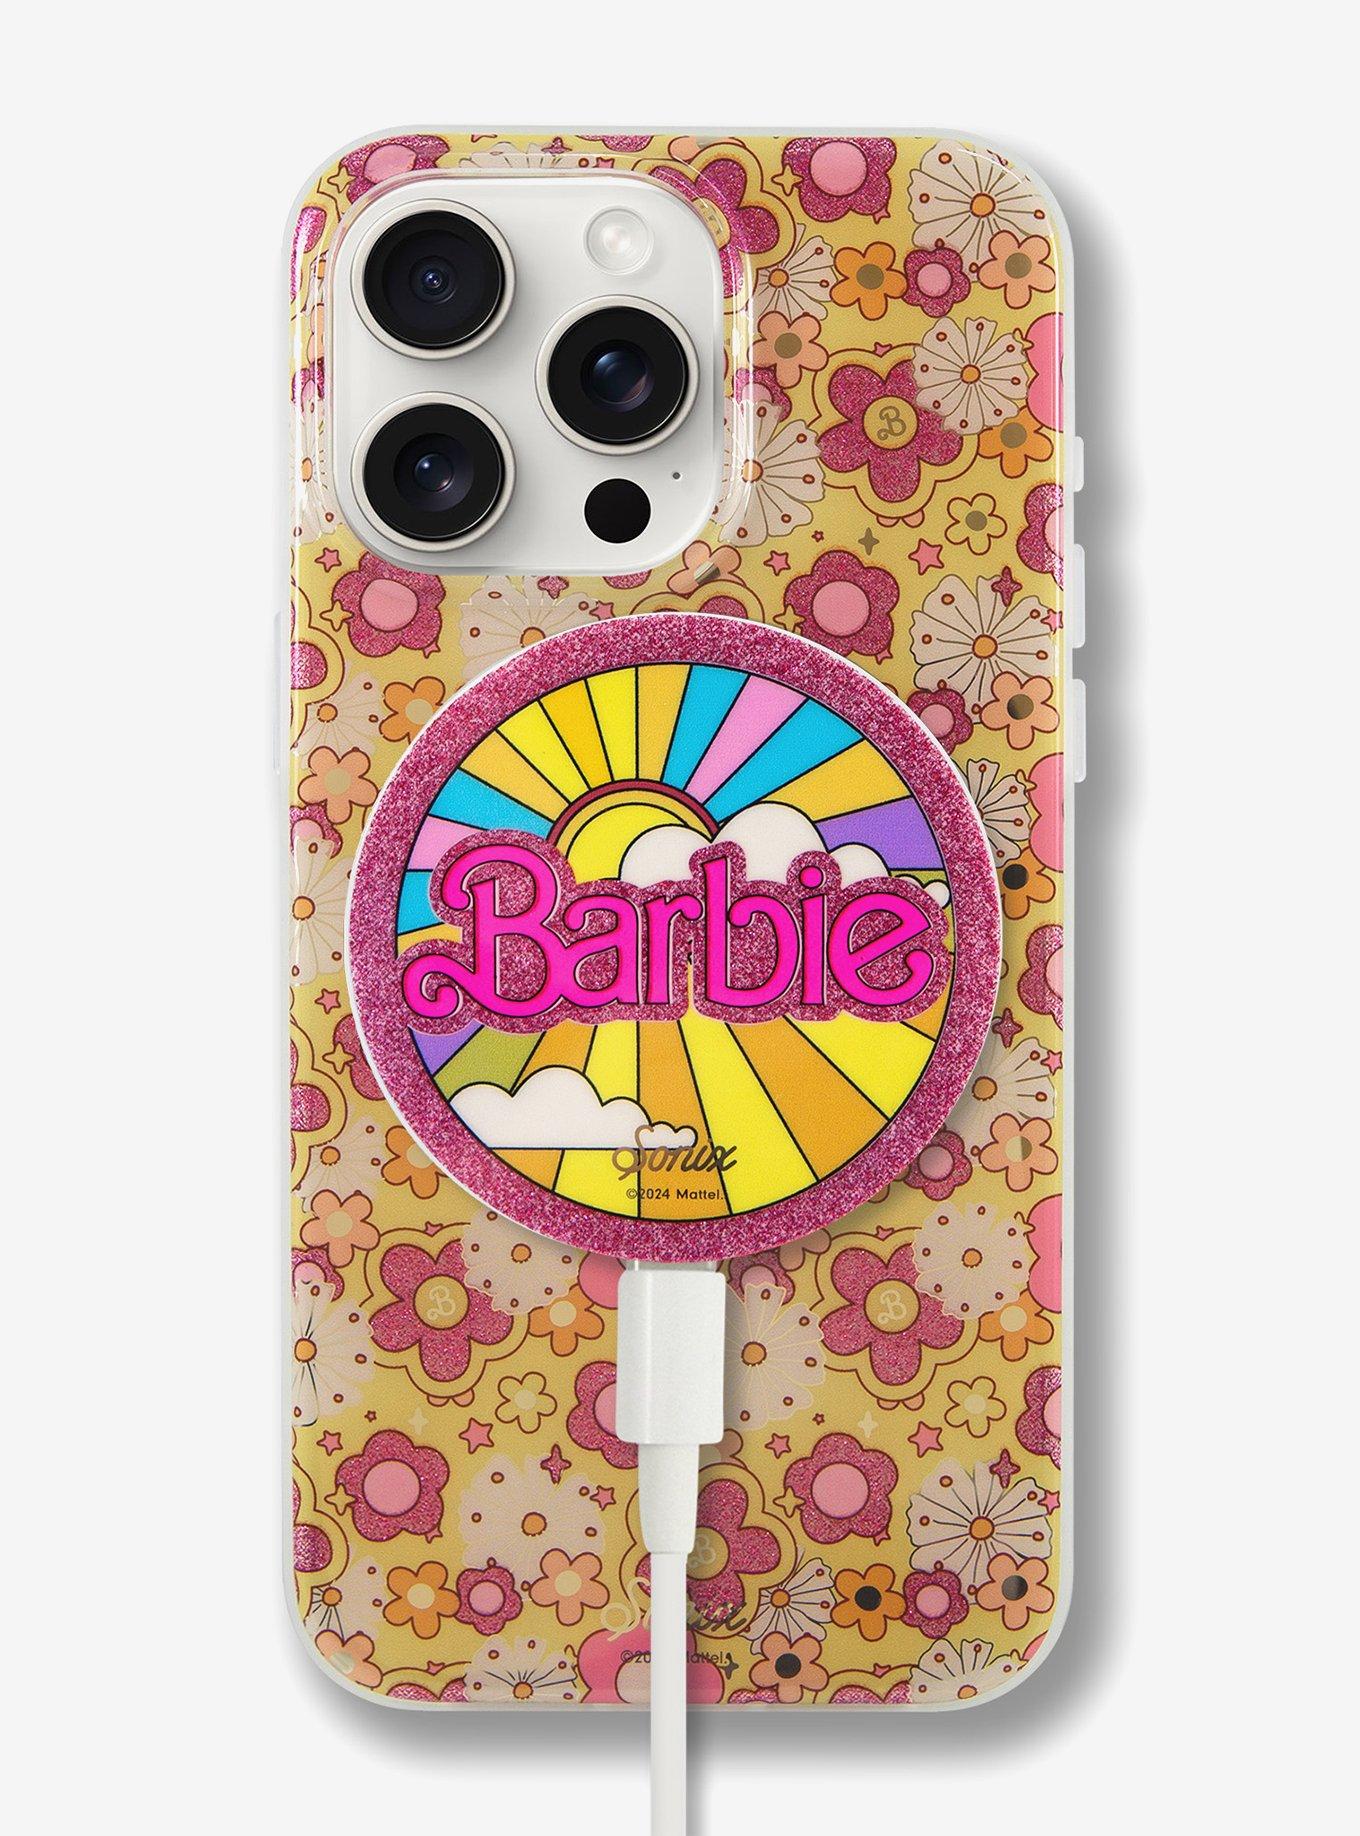 Sonix Malibu Vibes Barbie Magnetic Link Wireless Charger